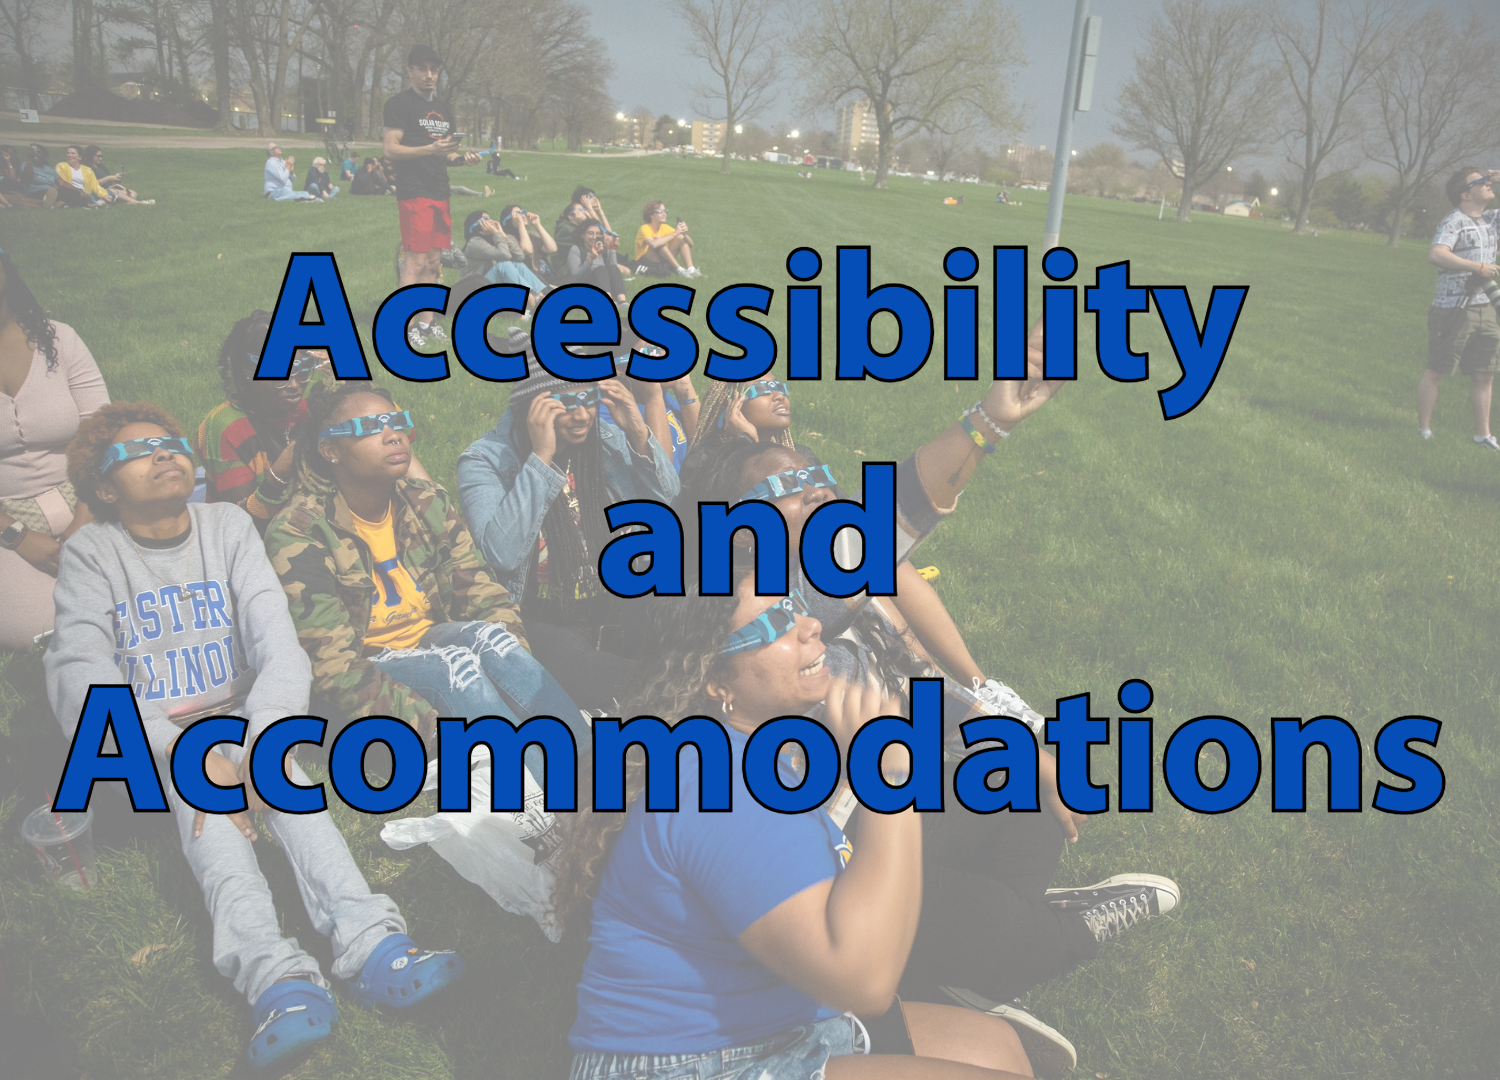 Accessability and Accommodations